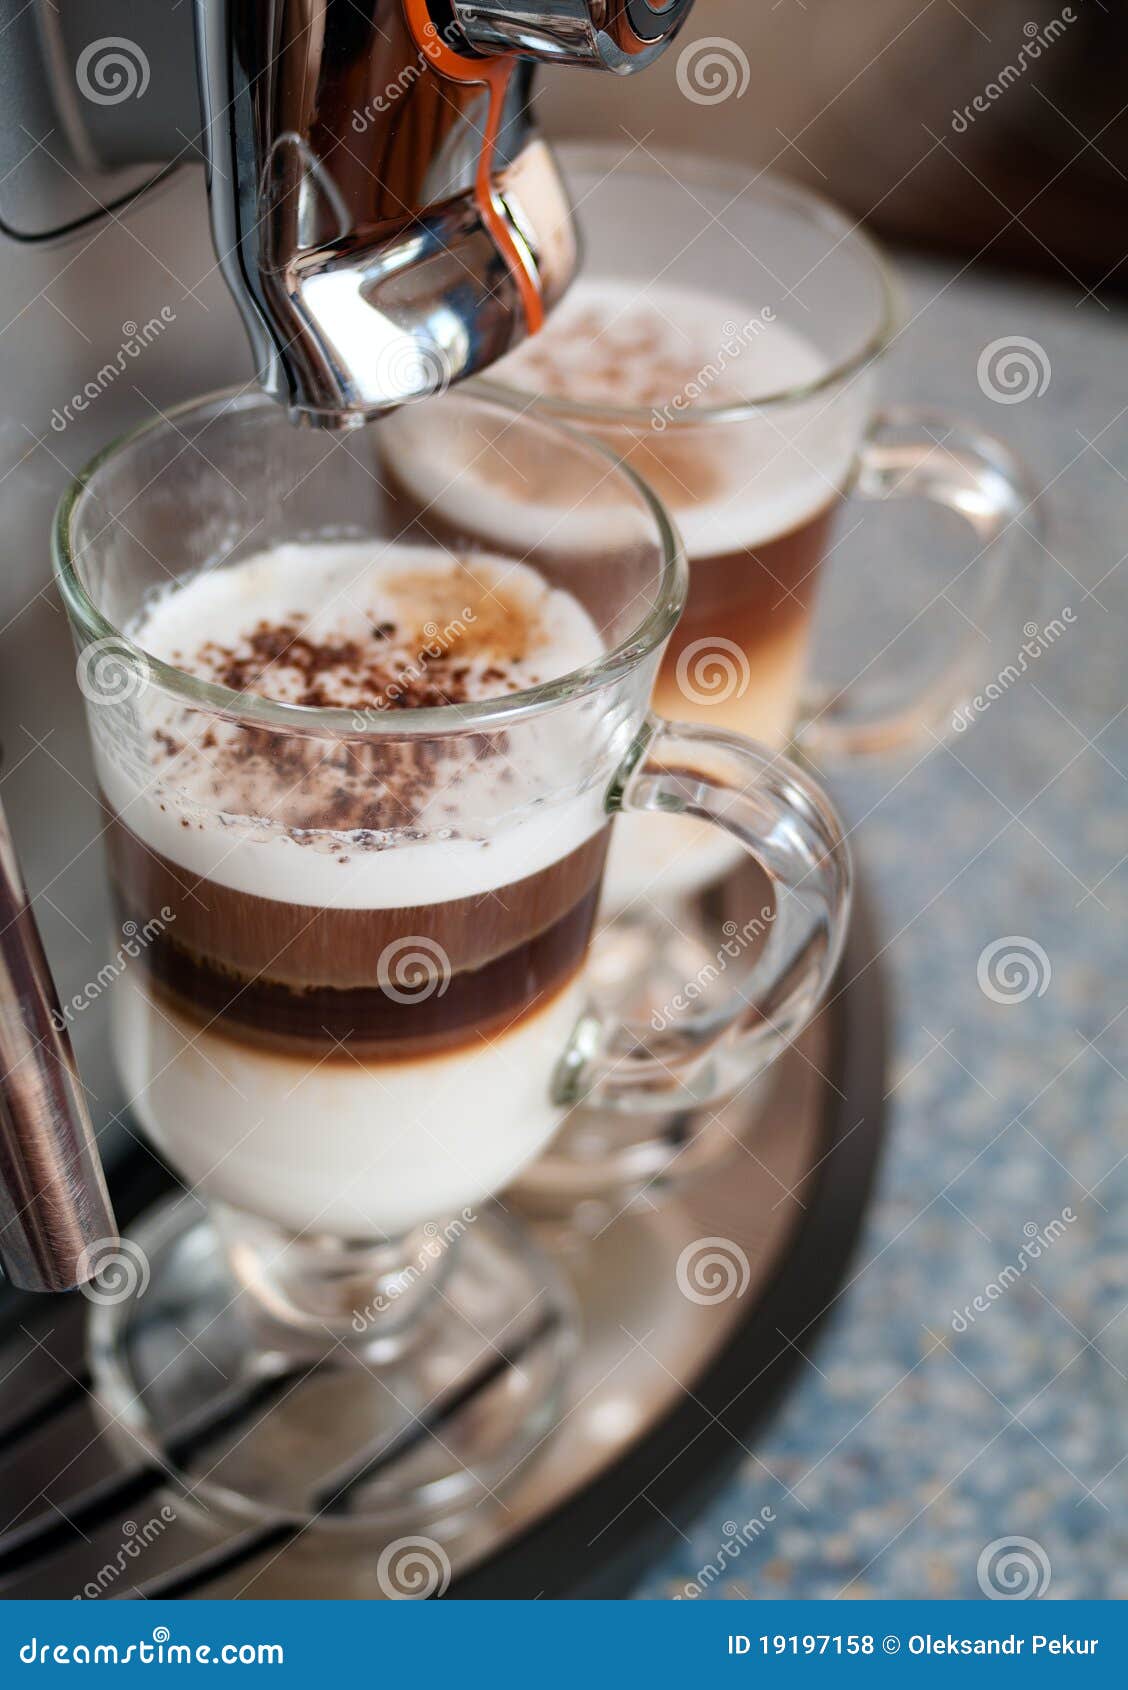 two glasses fileed with capuccino